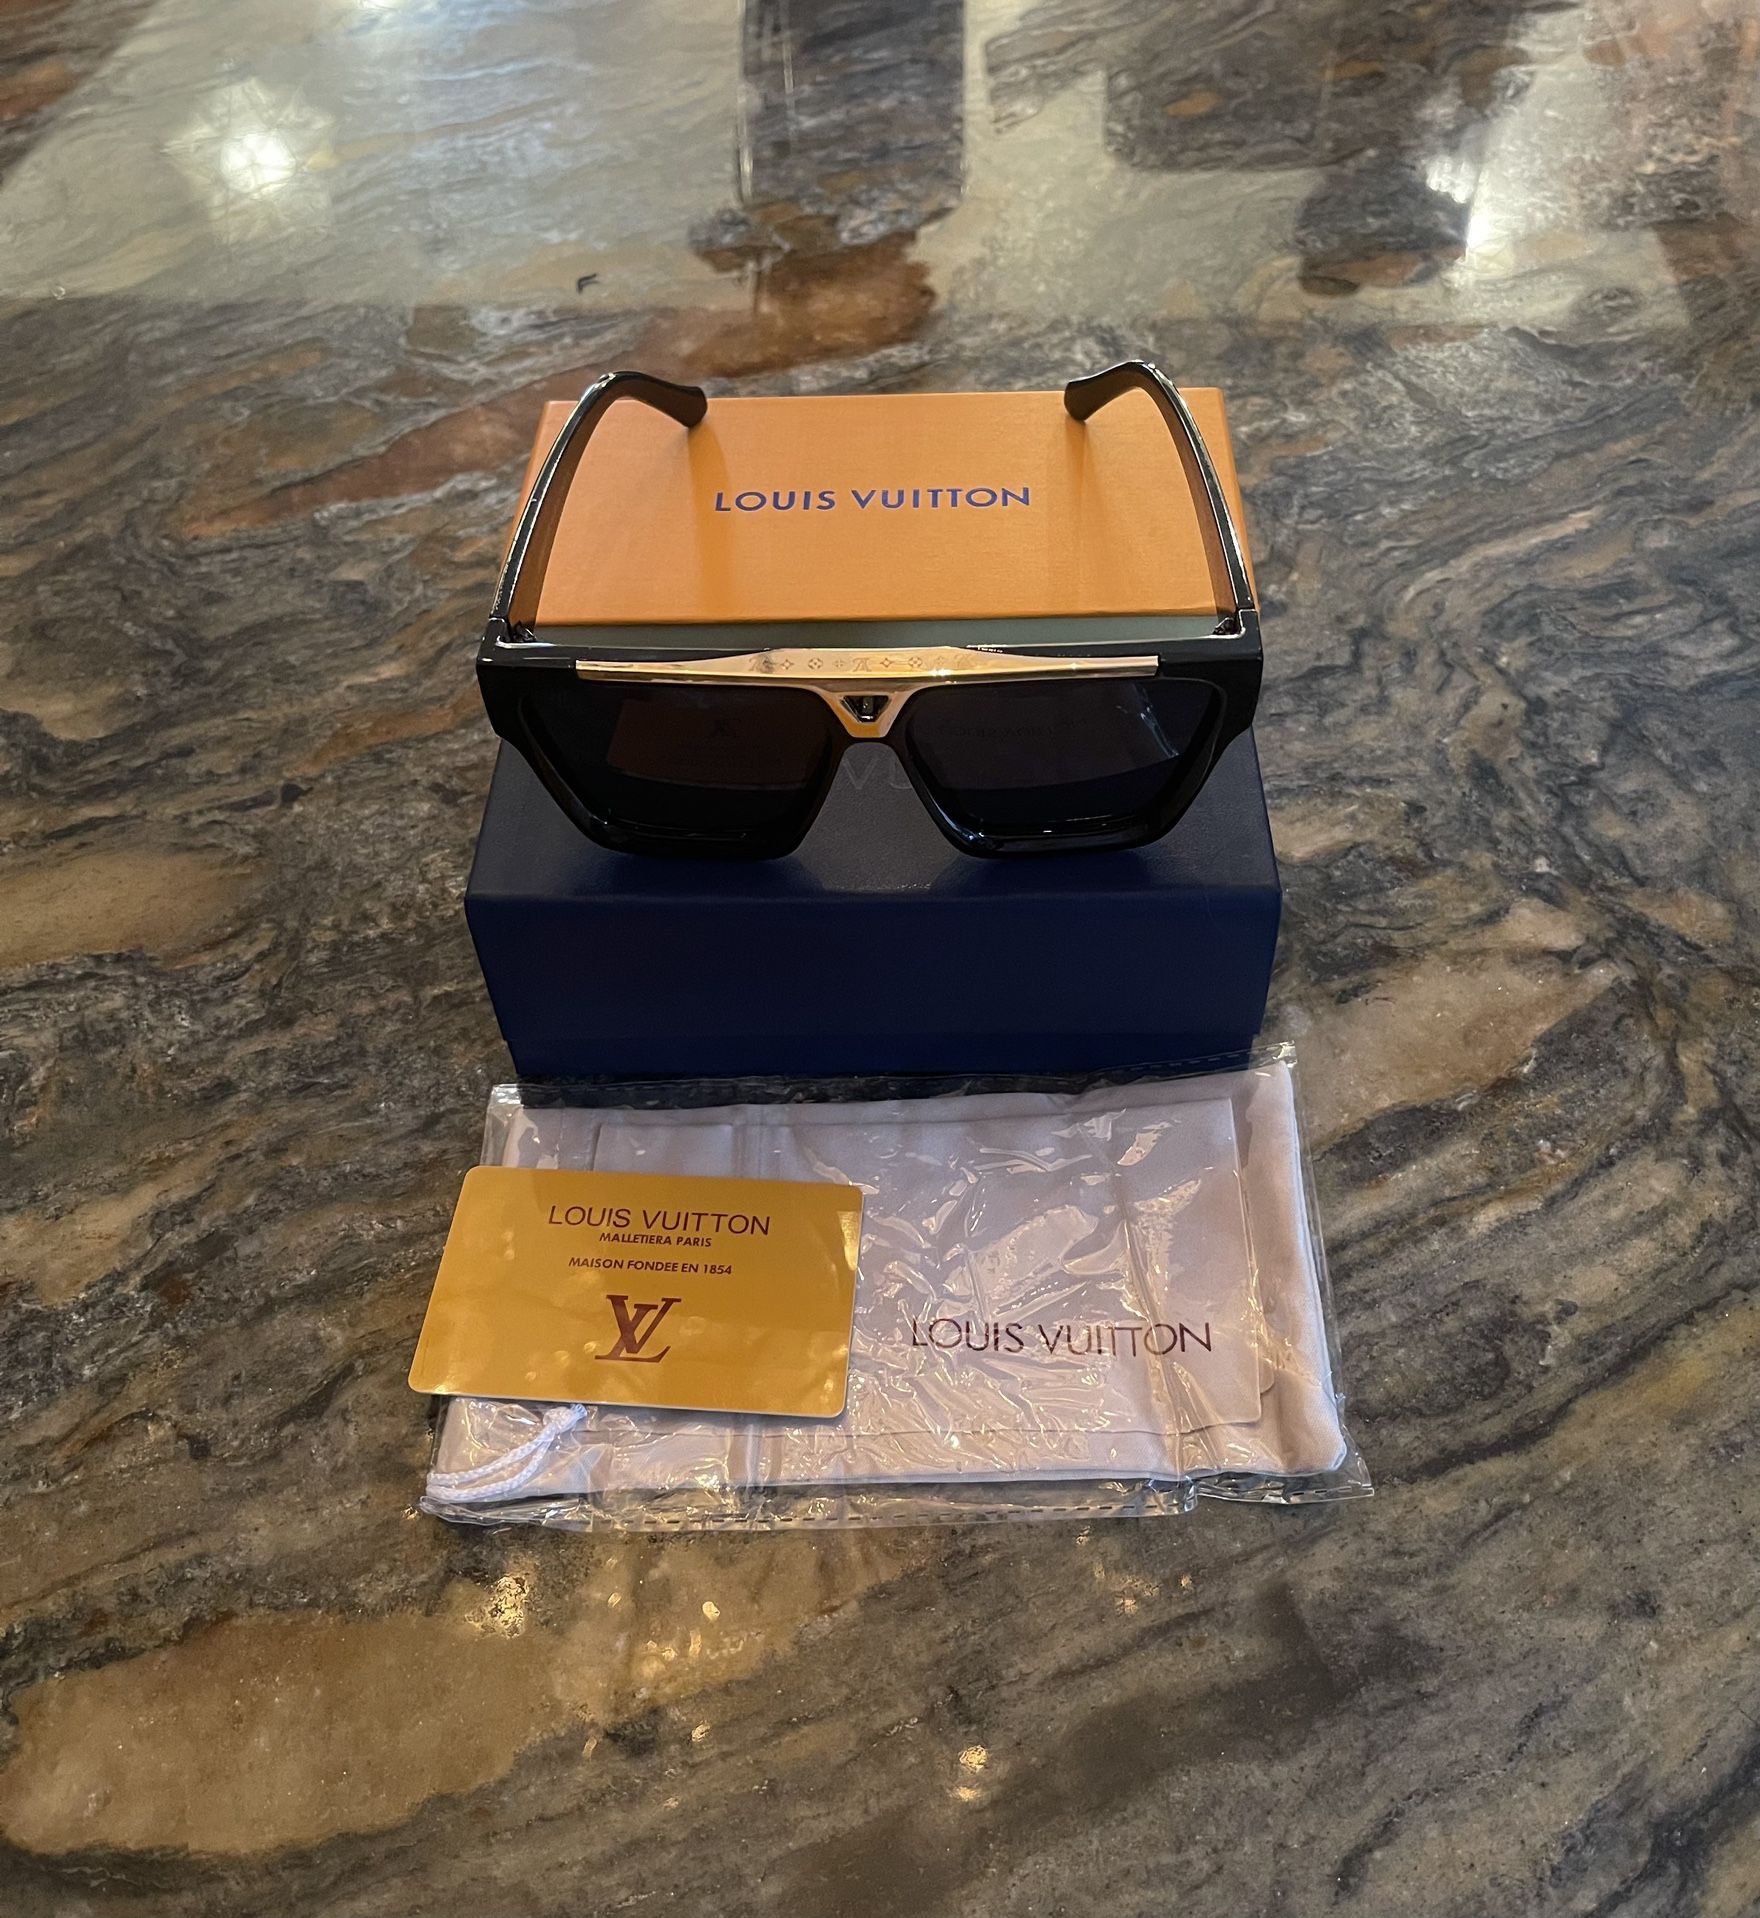 Louis Vuitton Evidence Millionaire Shades for Sale in Orange, CA